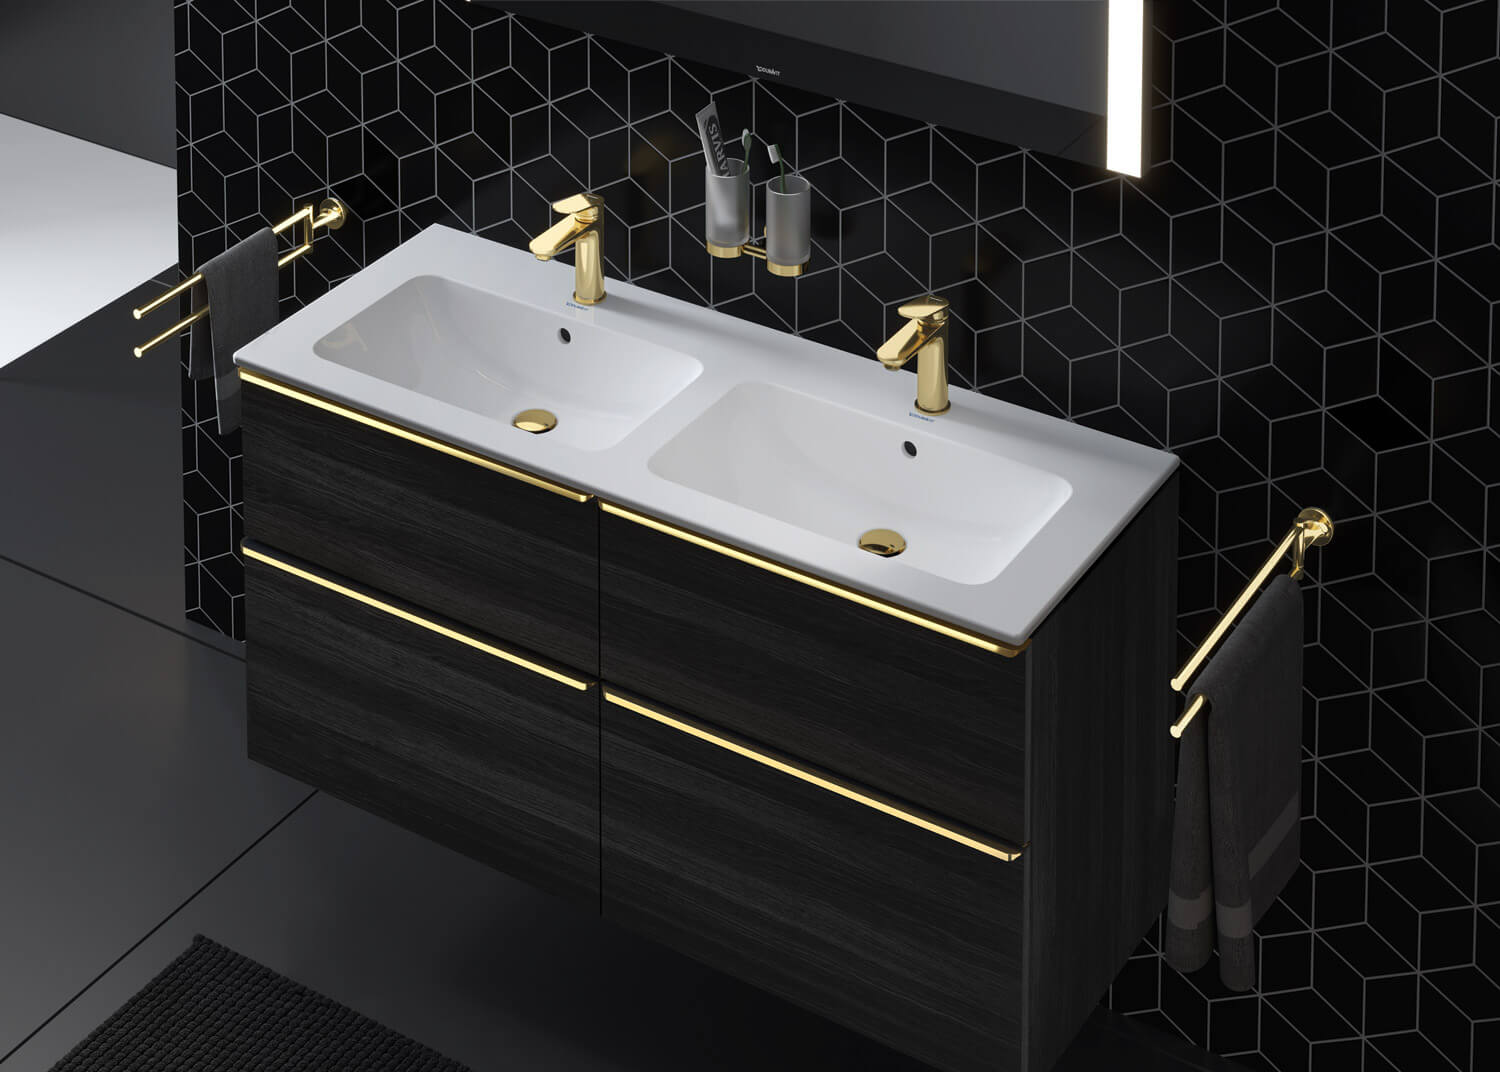 Washing place in classy style with Wave sink faucet
